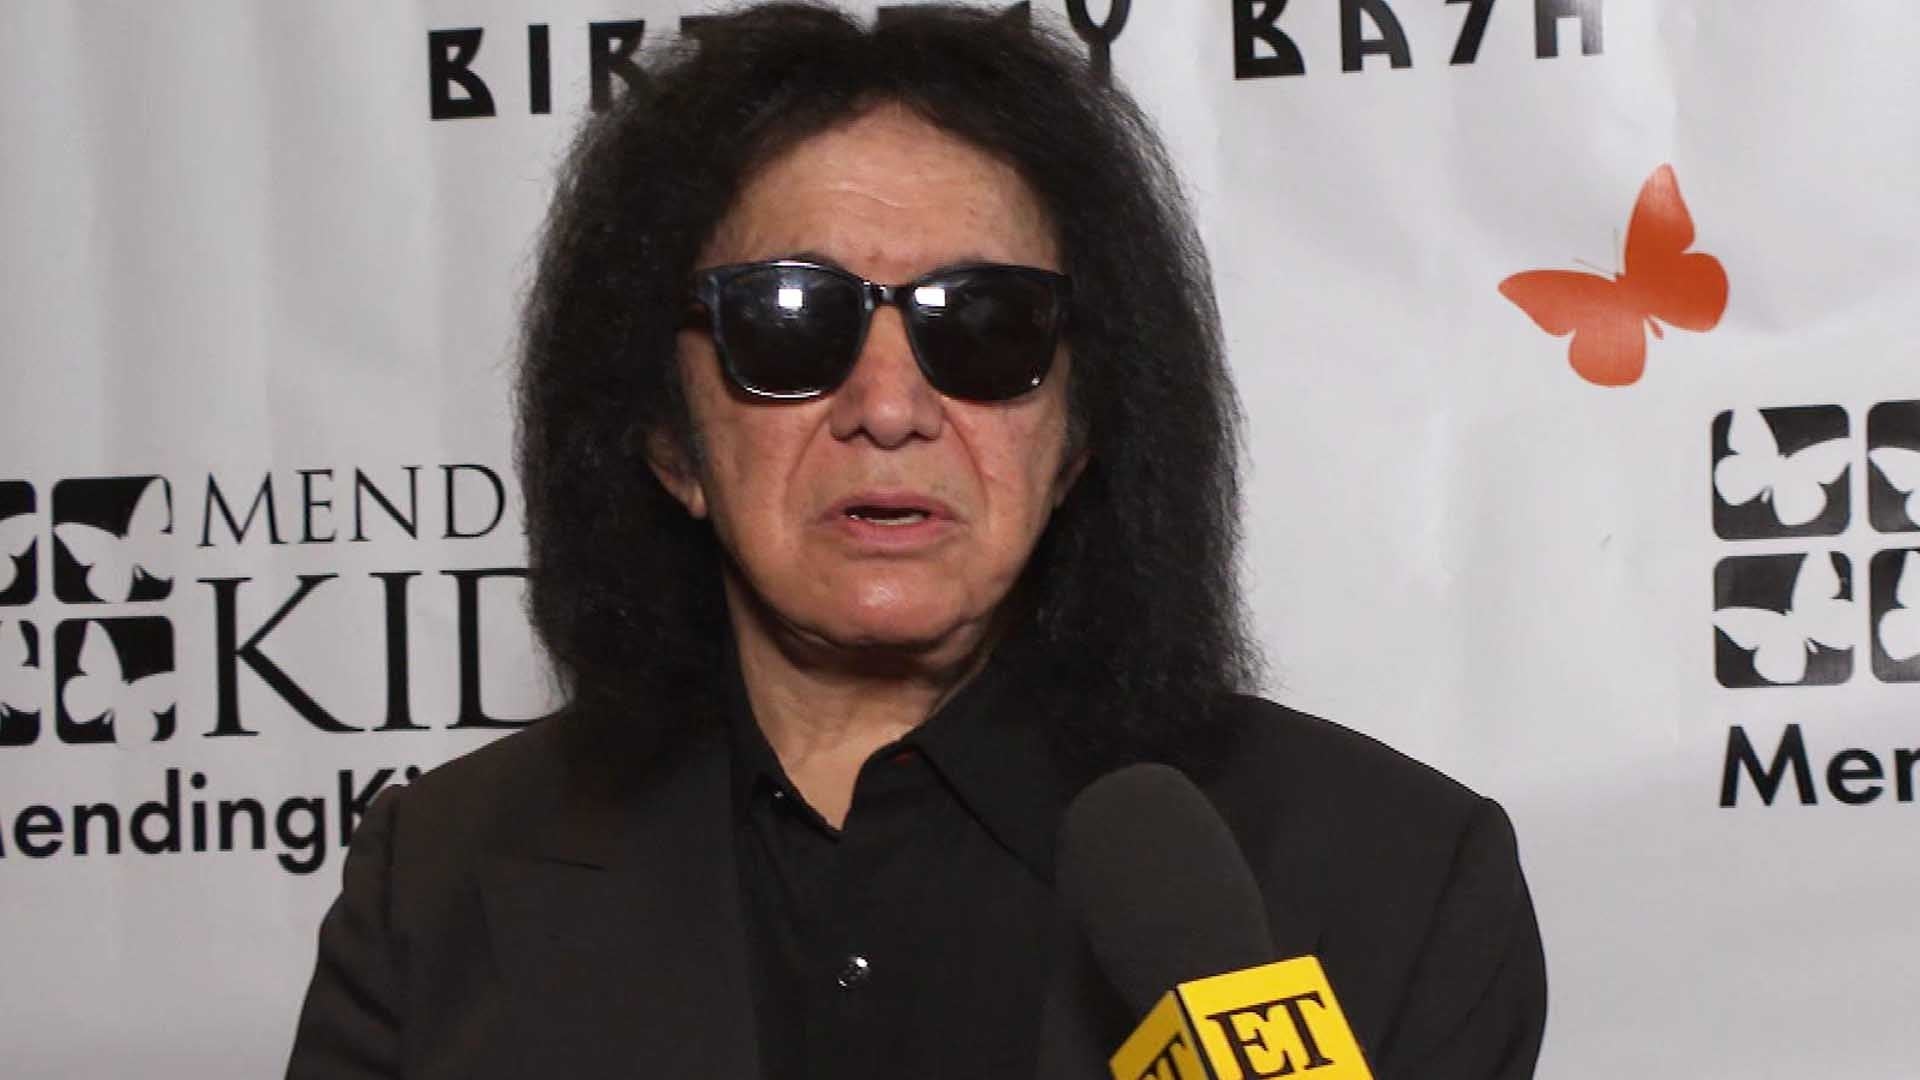 Gene Simmons Celebrates His 74th Birthday By Bowling For a Good Cause (Exclusive)